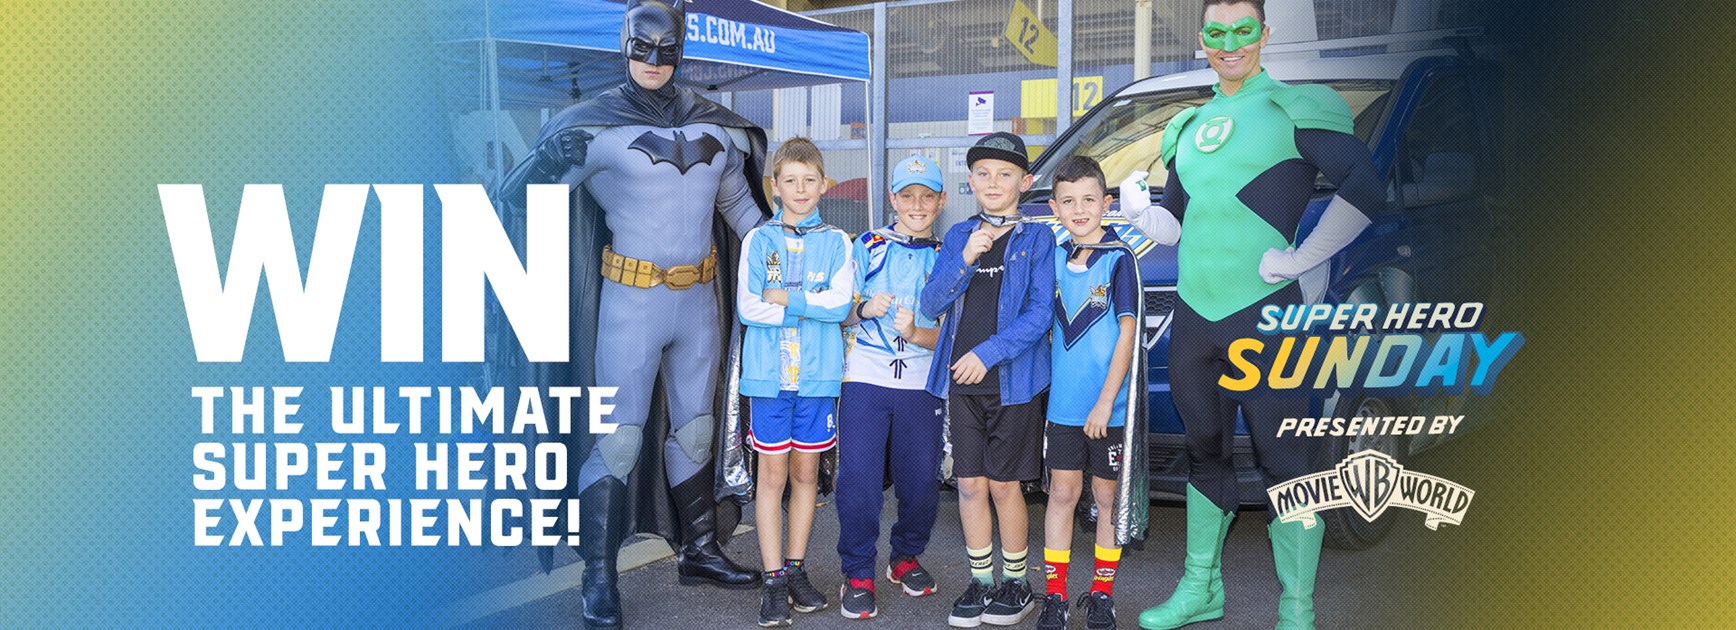 WIN the Ultimate Super Hero Experience!